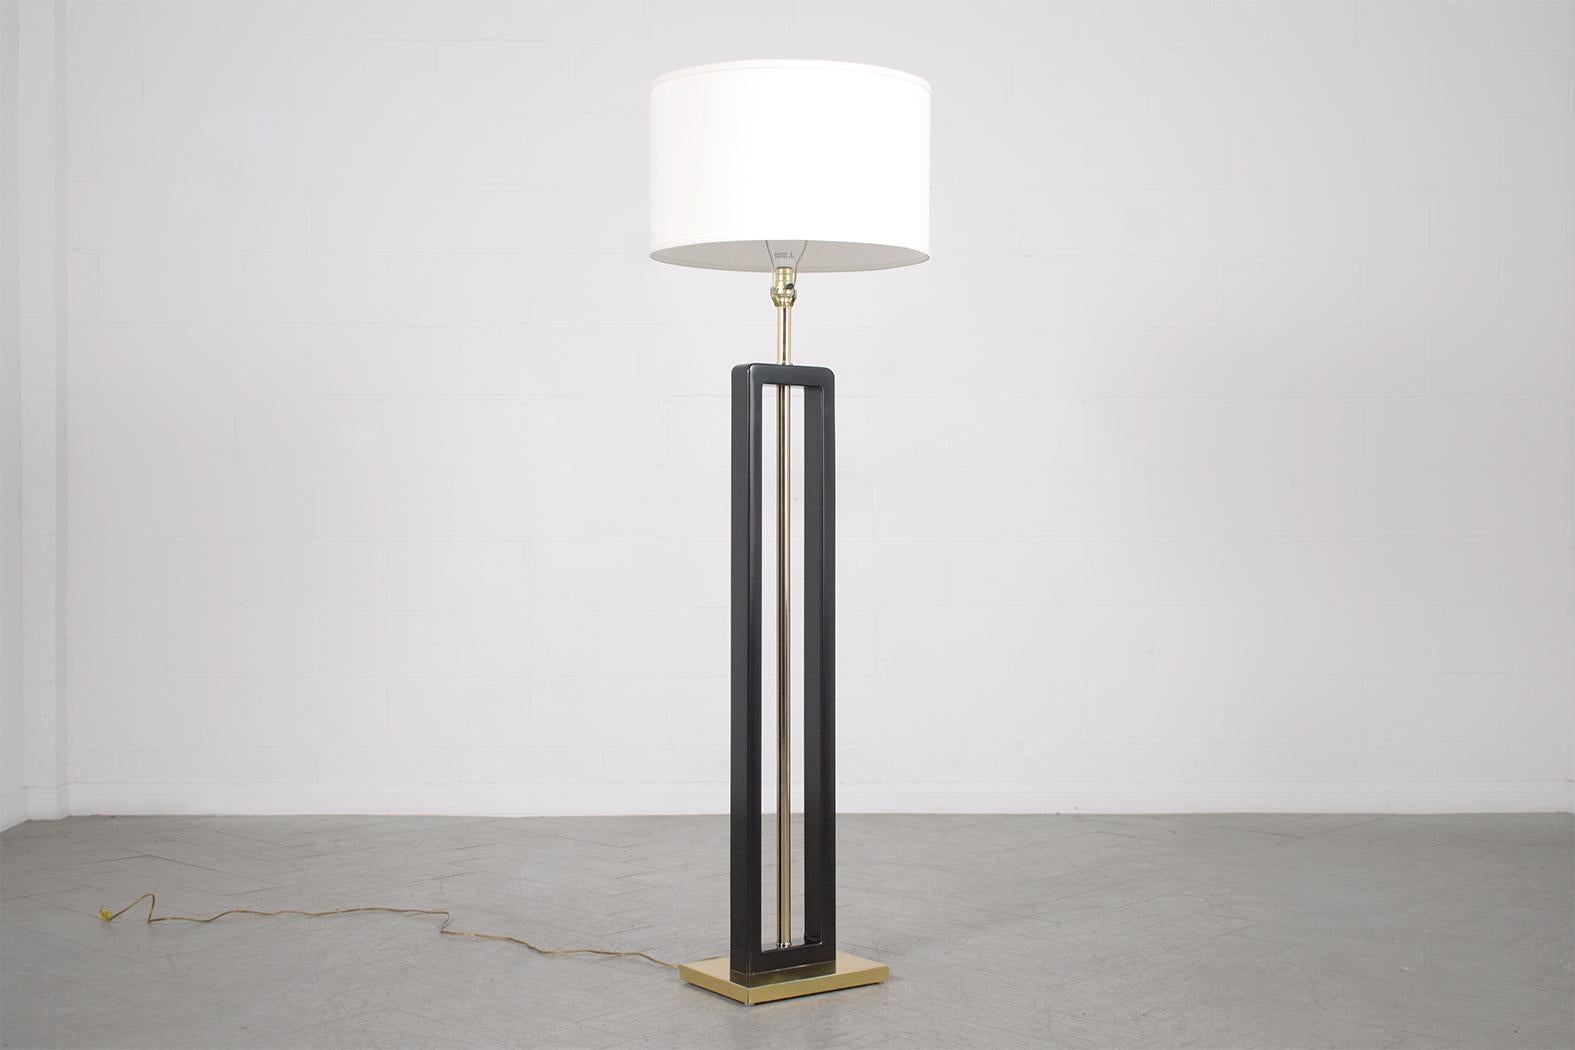 Our extraordinary vintage 1970s floor lamp, is expertly crafted from a blend of brass and metal. Maintained in excellent condition and recently restored by our in-house professional craftsman team, this mid-century modern lamp is sleek and